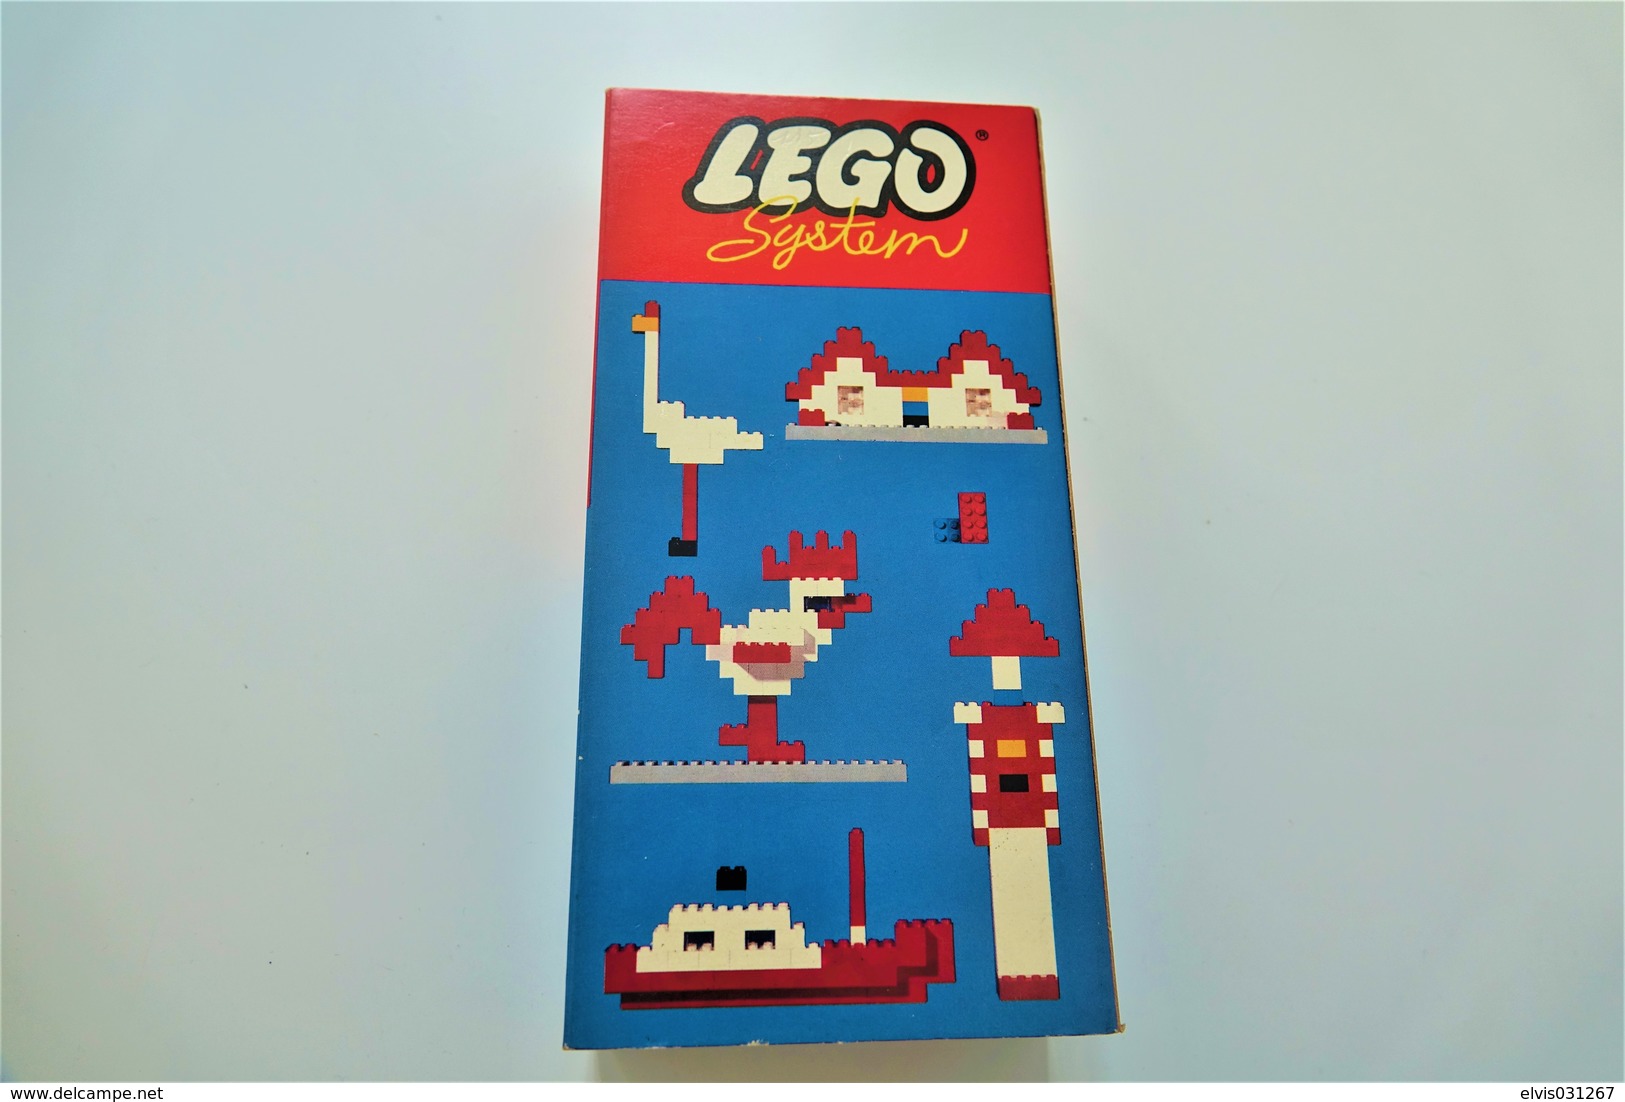 LEGO - 010 Basic Building Set In Cardboard NEW OLD STOCK MINT CONDITION  - Colector Item - Original Lego 1965 - Vintage - Catalogues